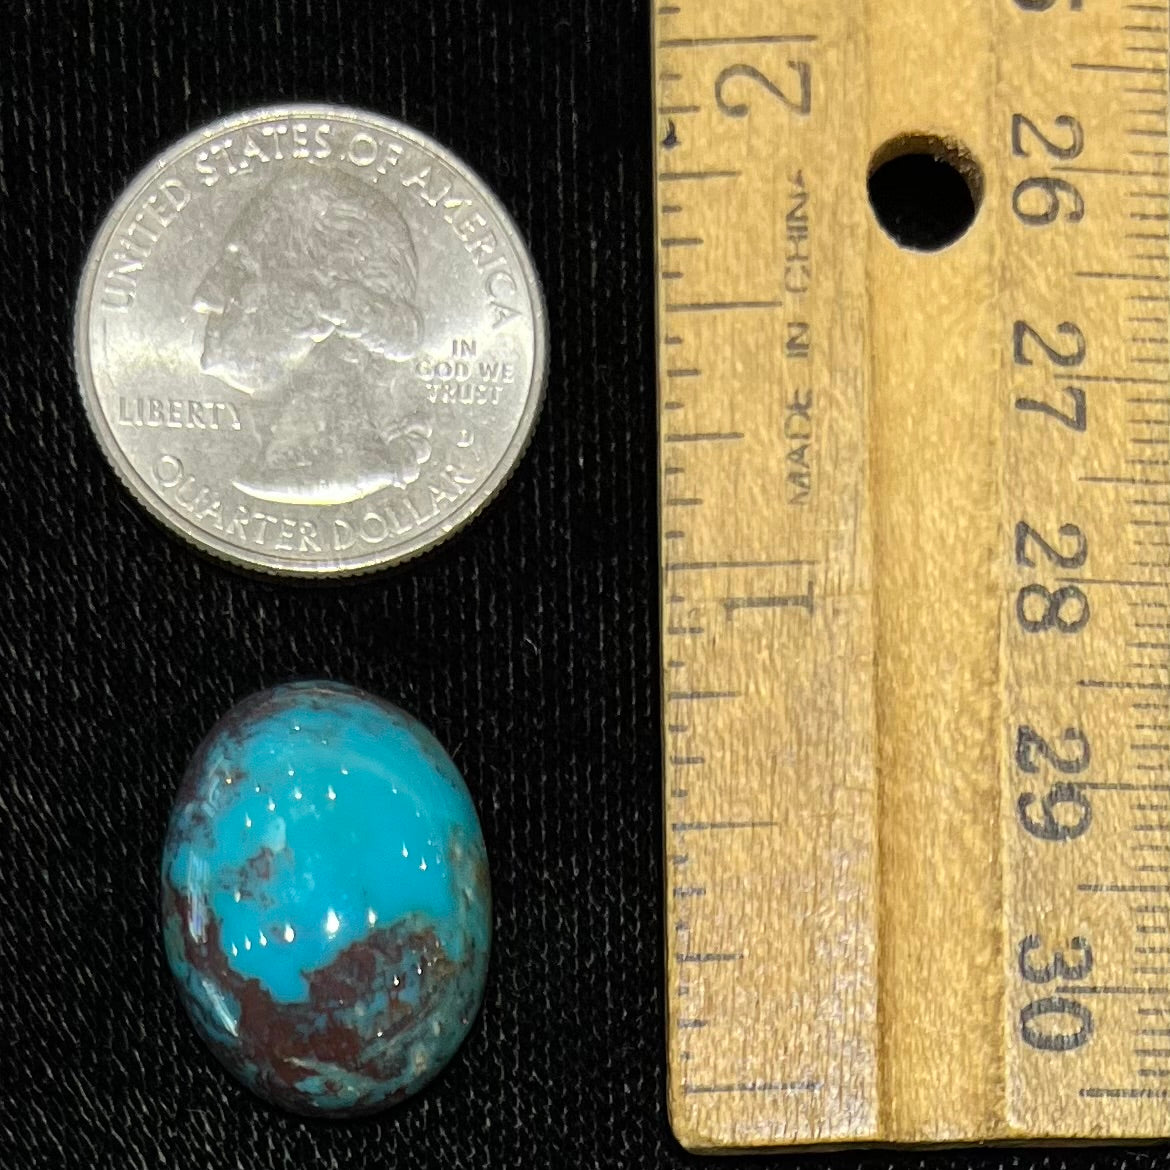 An oval cabochon cut blue turquoise stone with red cuprite inclusions from Royston District, Nevada.